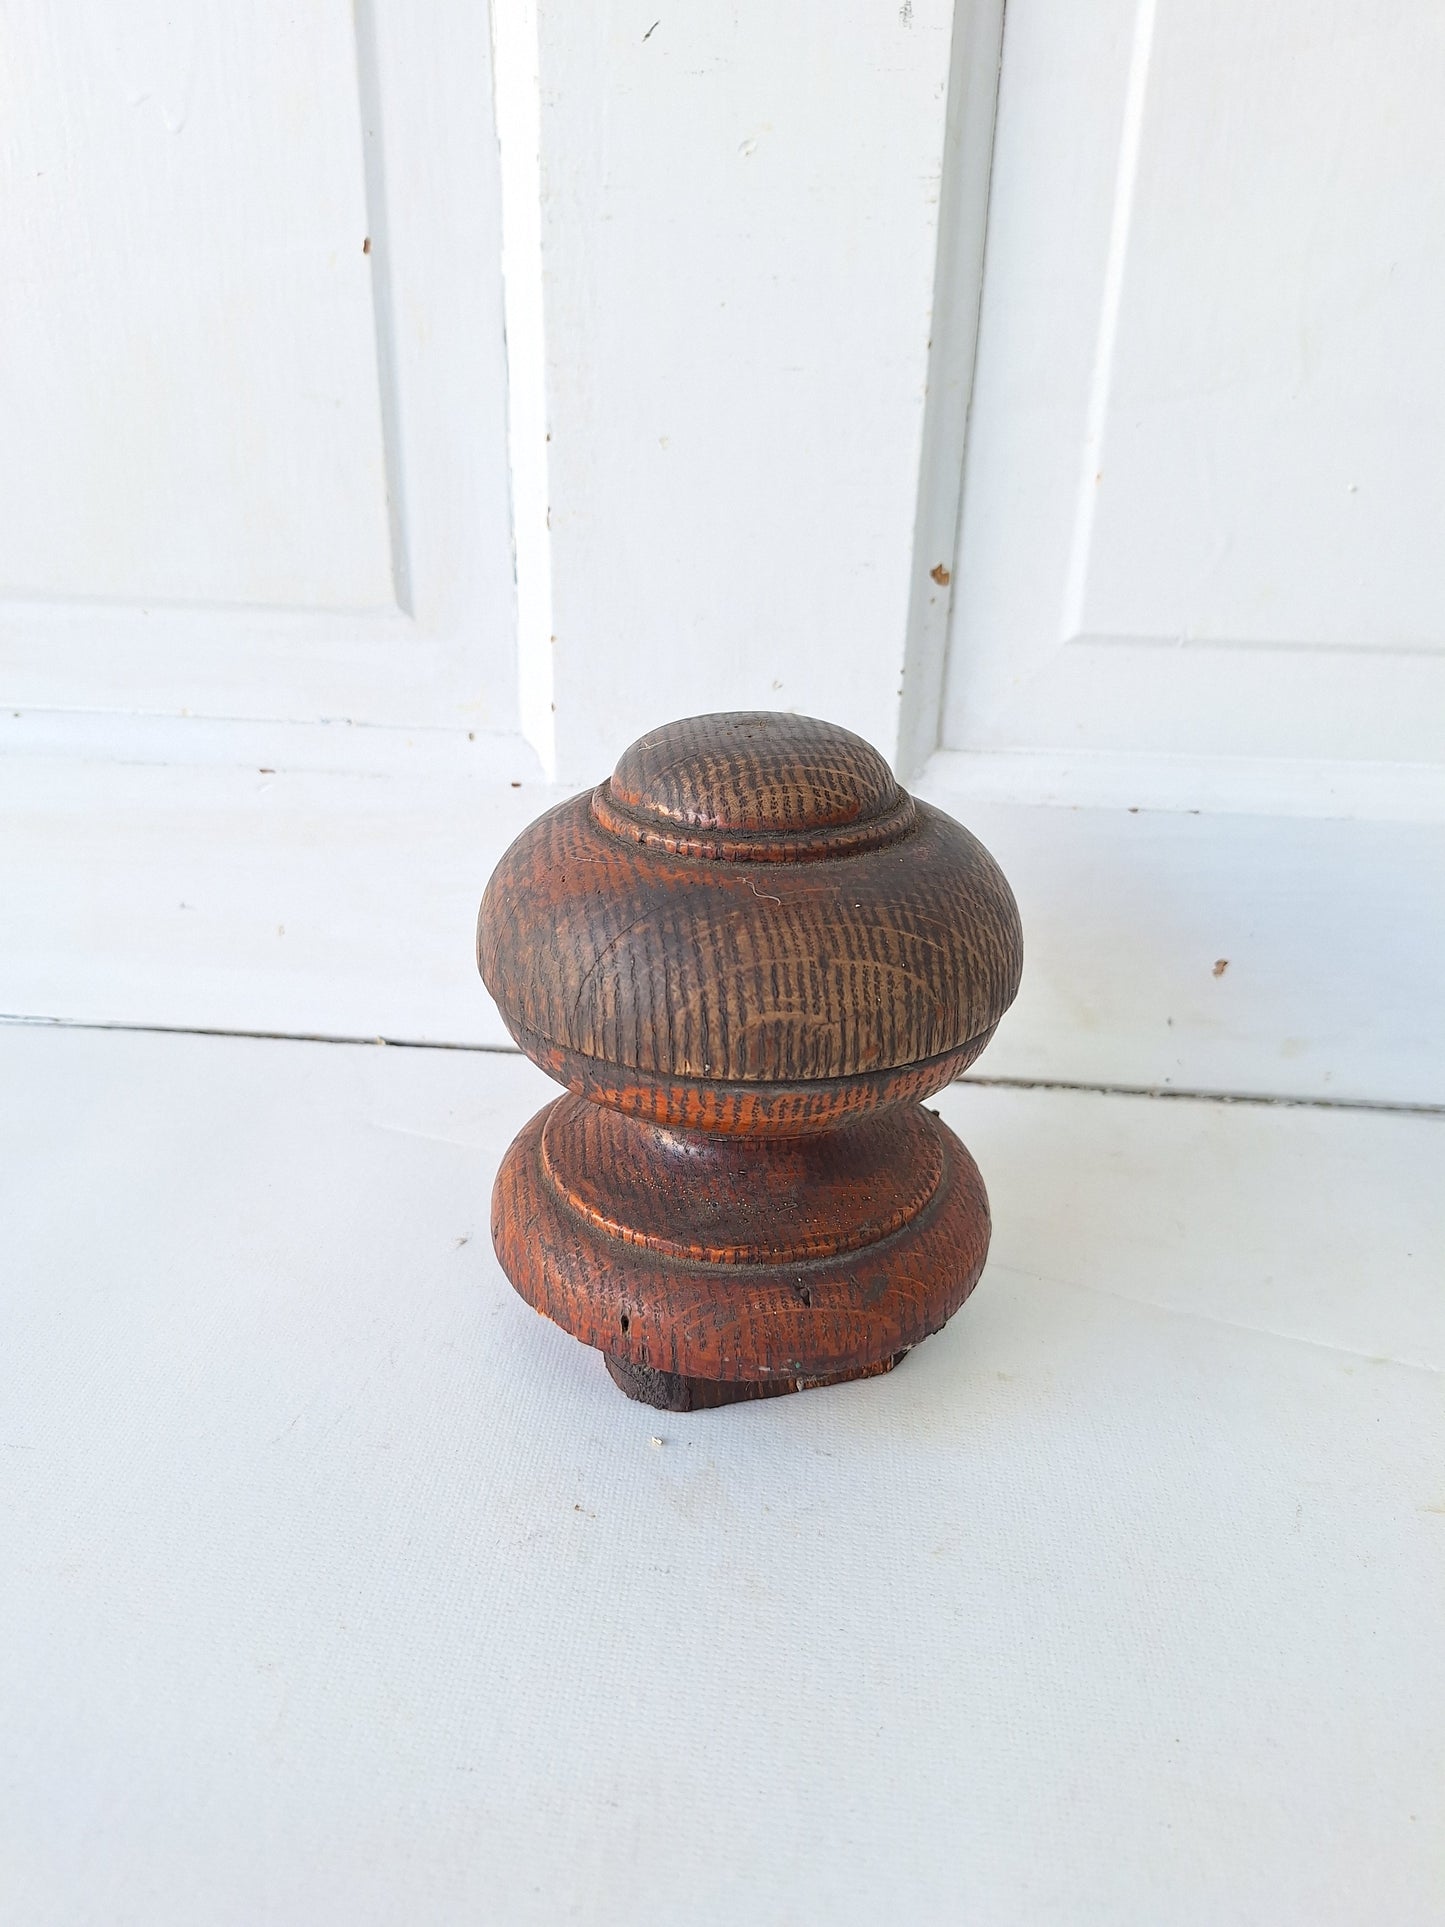 Antique Turned Wood Newel Post Top, Victorian Era Staircase Newel Post Finial 040901